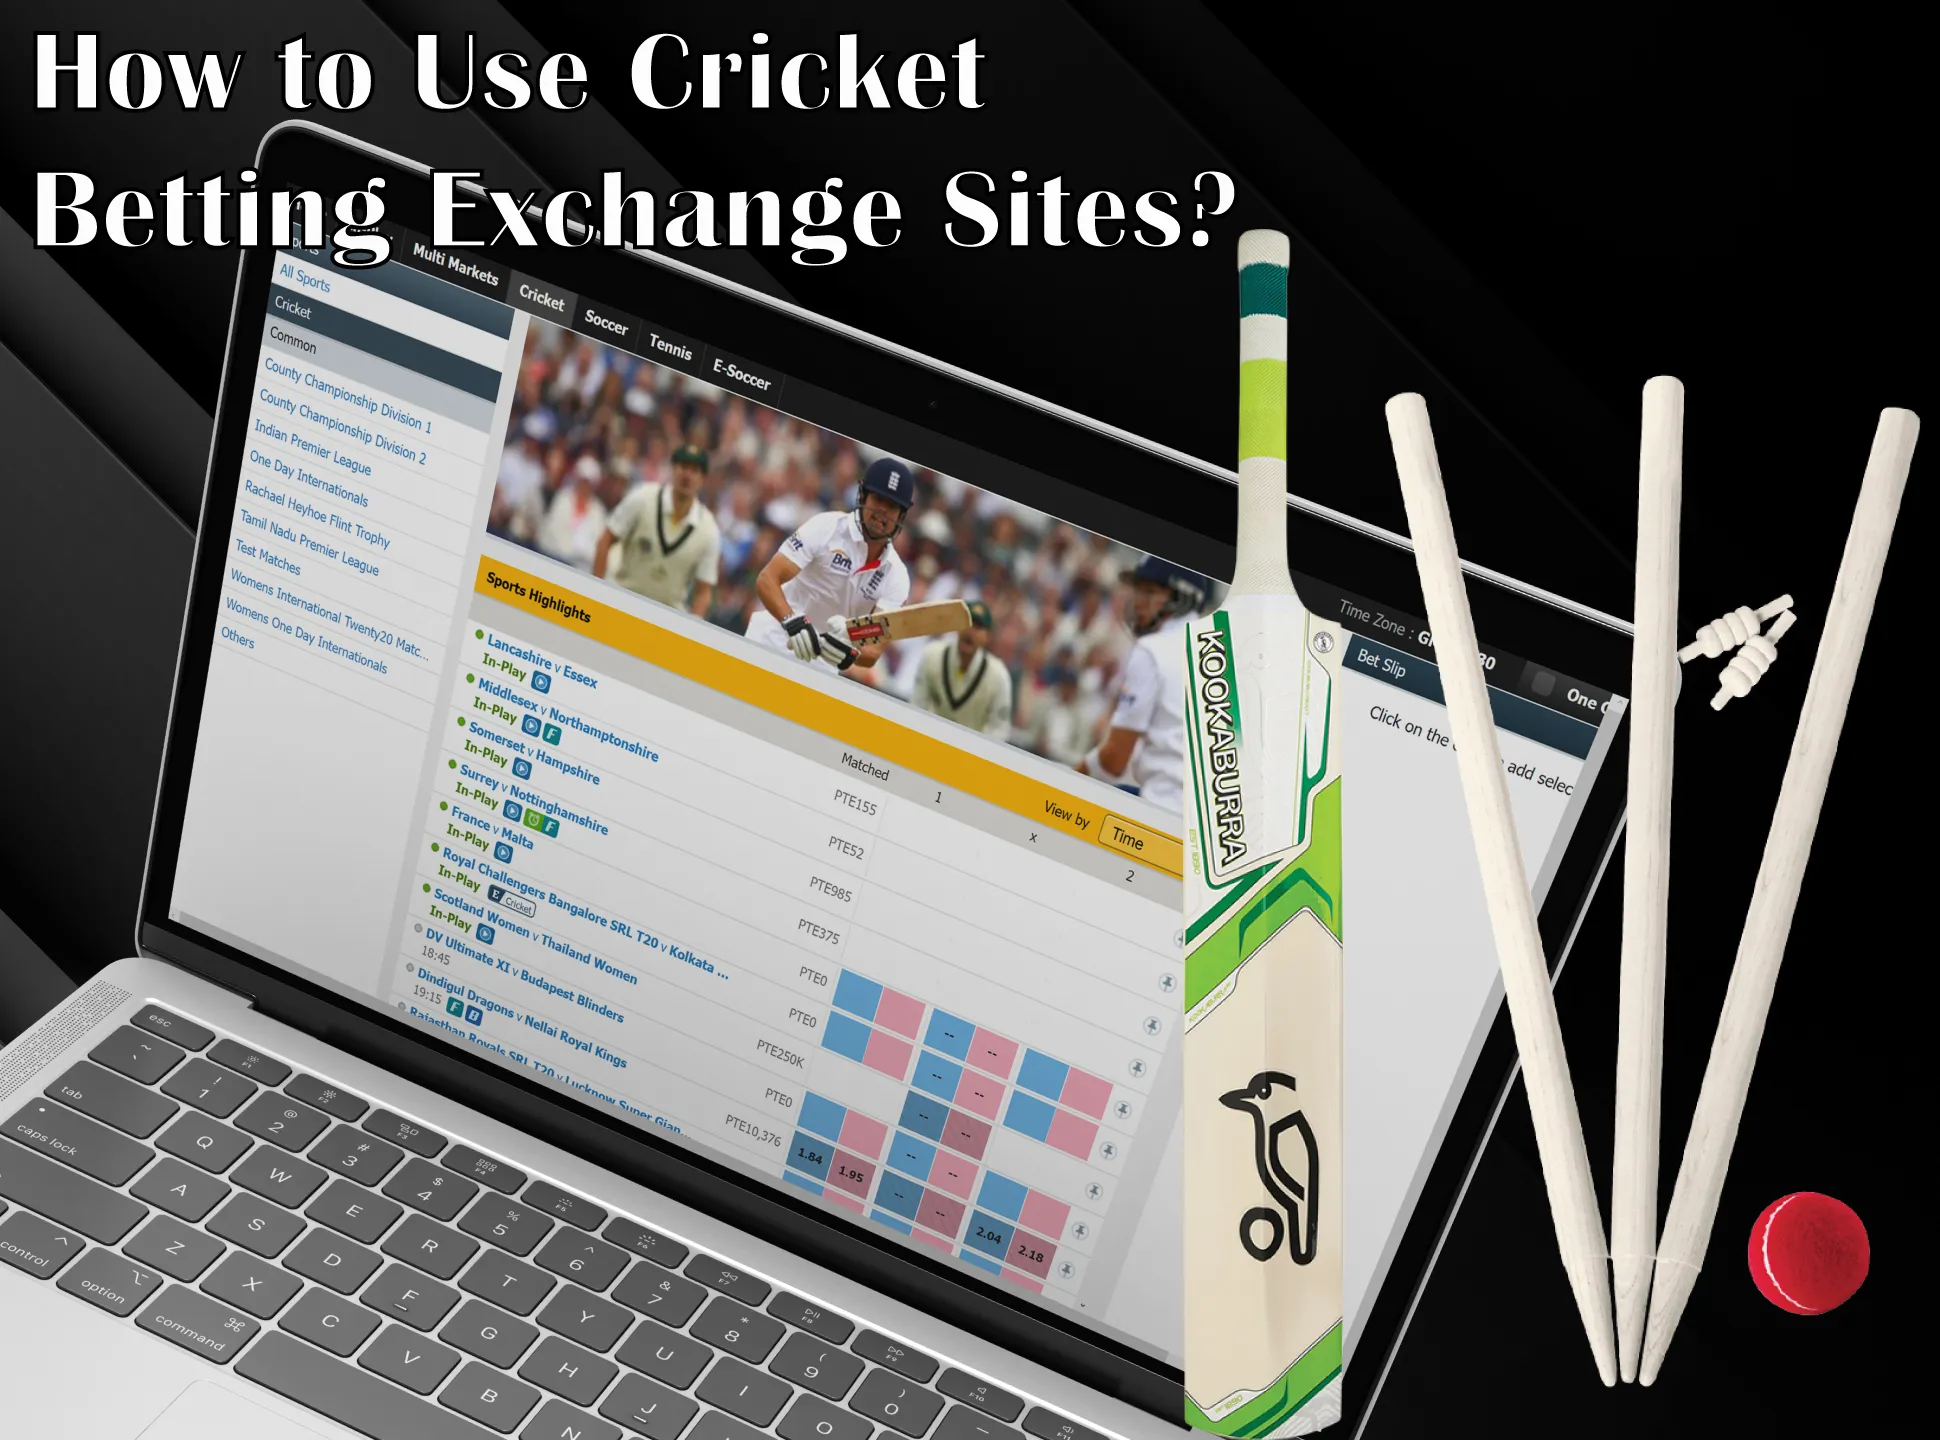 Read how easy it is for you to use cricket betting exchanges sites.